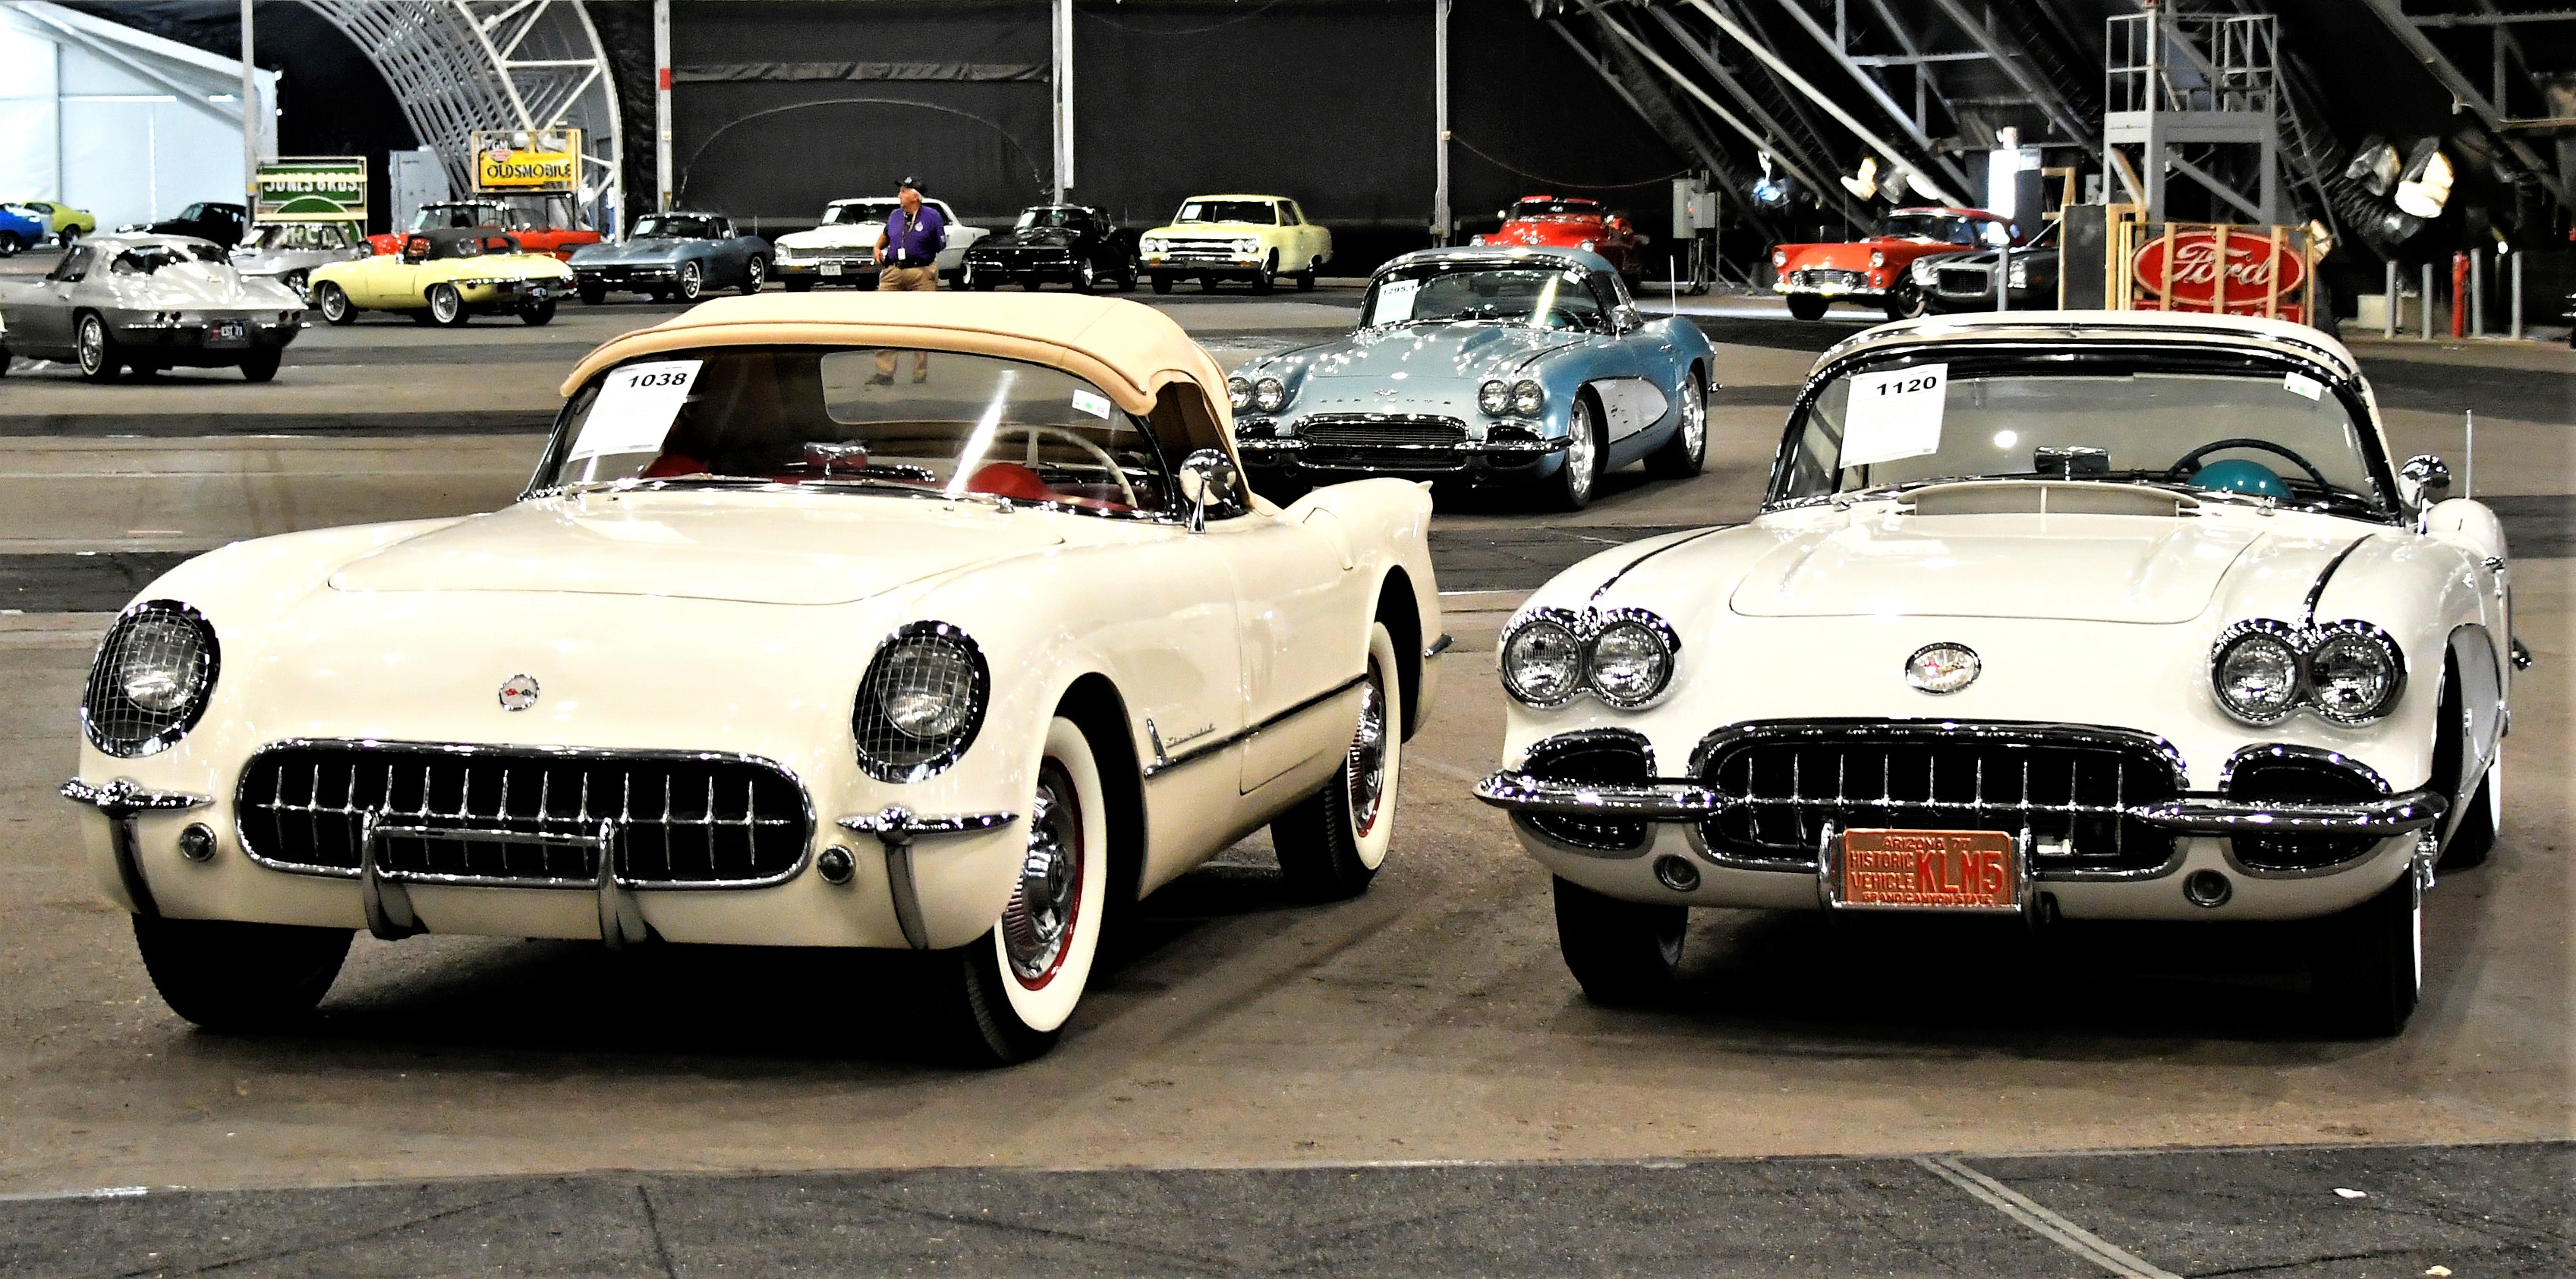 , Top-dog muscle cars ready for action at Barrett-Jackson in Scottsdale, ClassicCars.com Journal